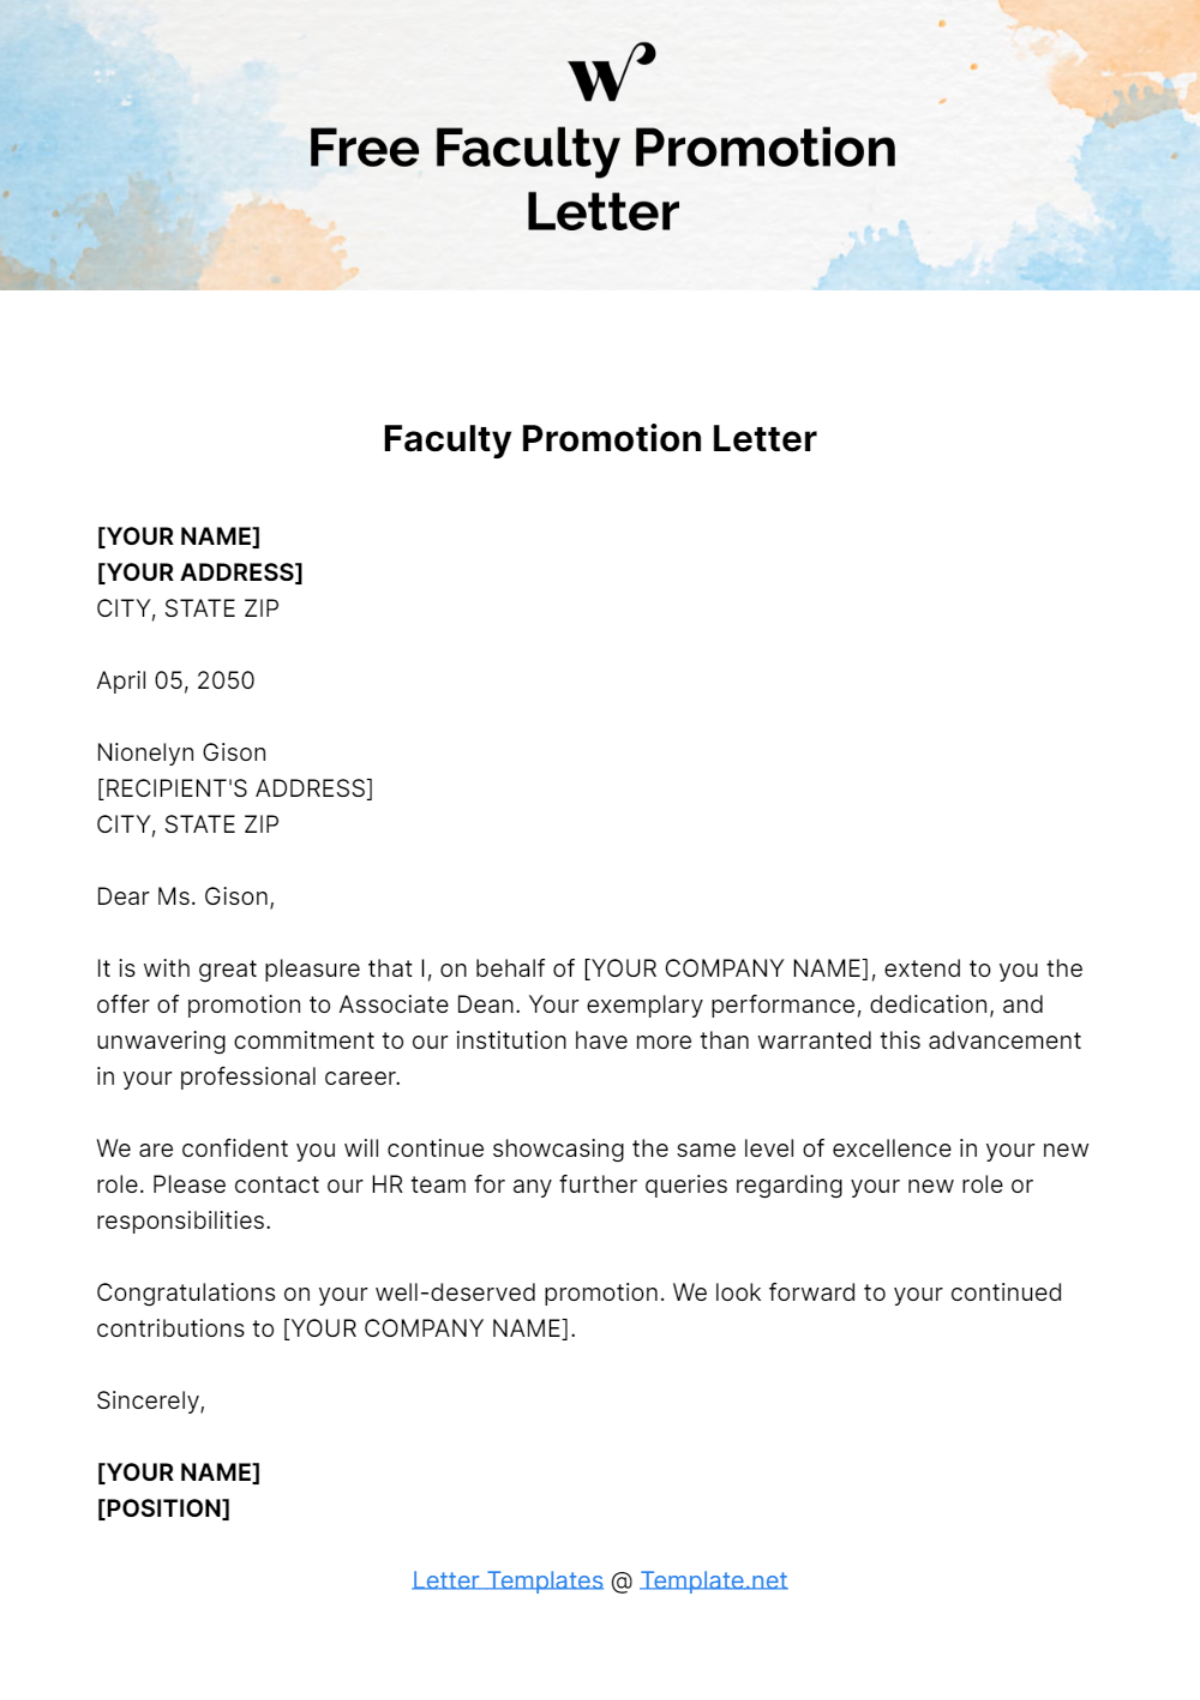 Free Faculty Promotion Letter Template